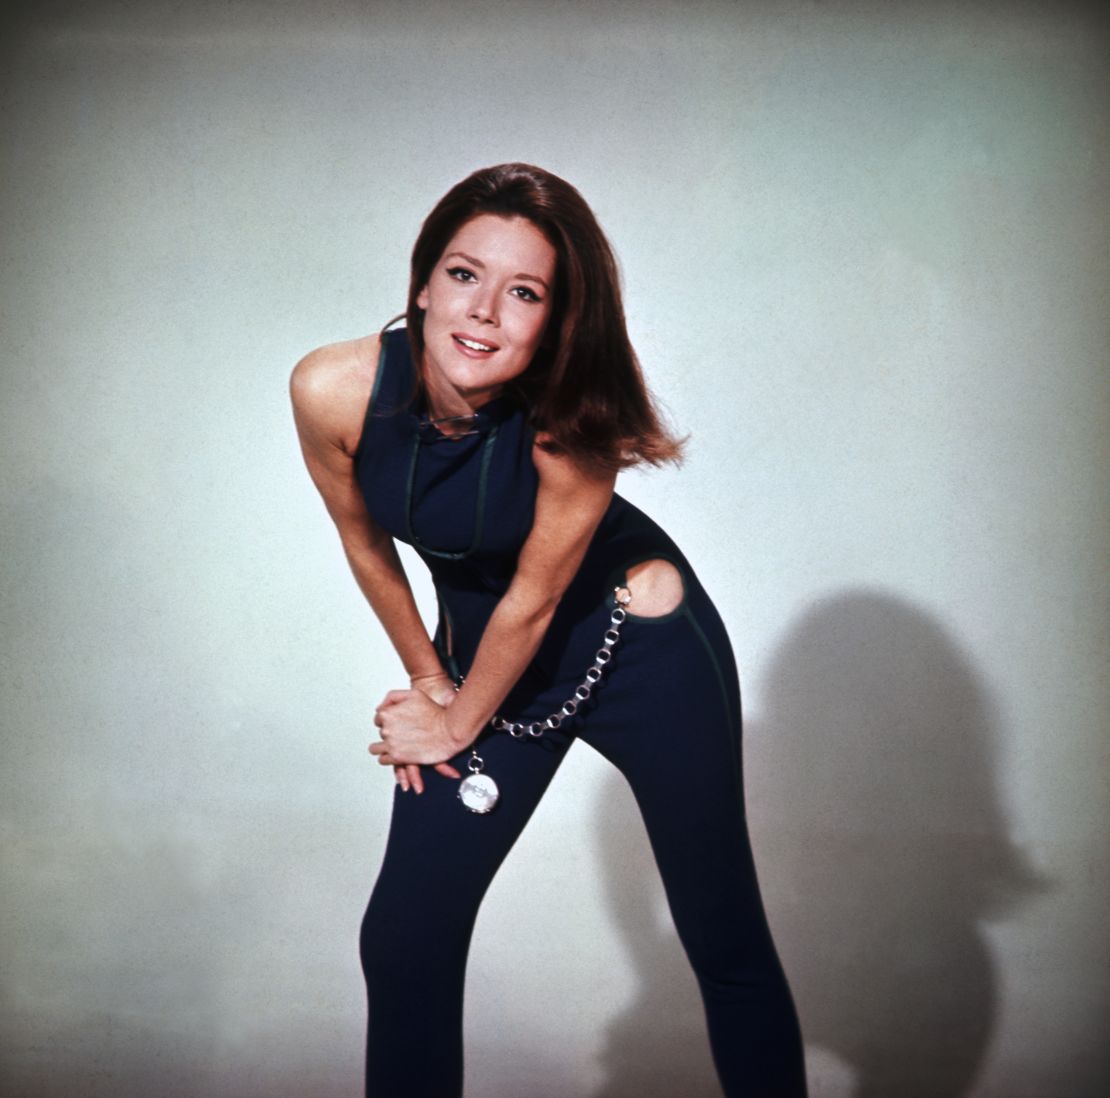 Rigg in 1968 as Emma Peel in television spy series "The Avengers."